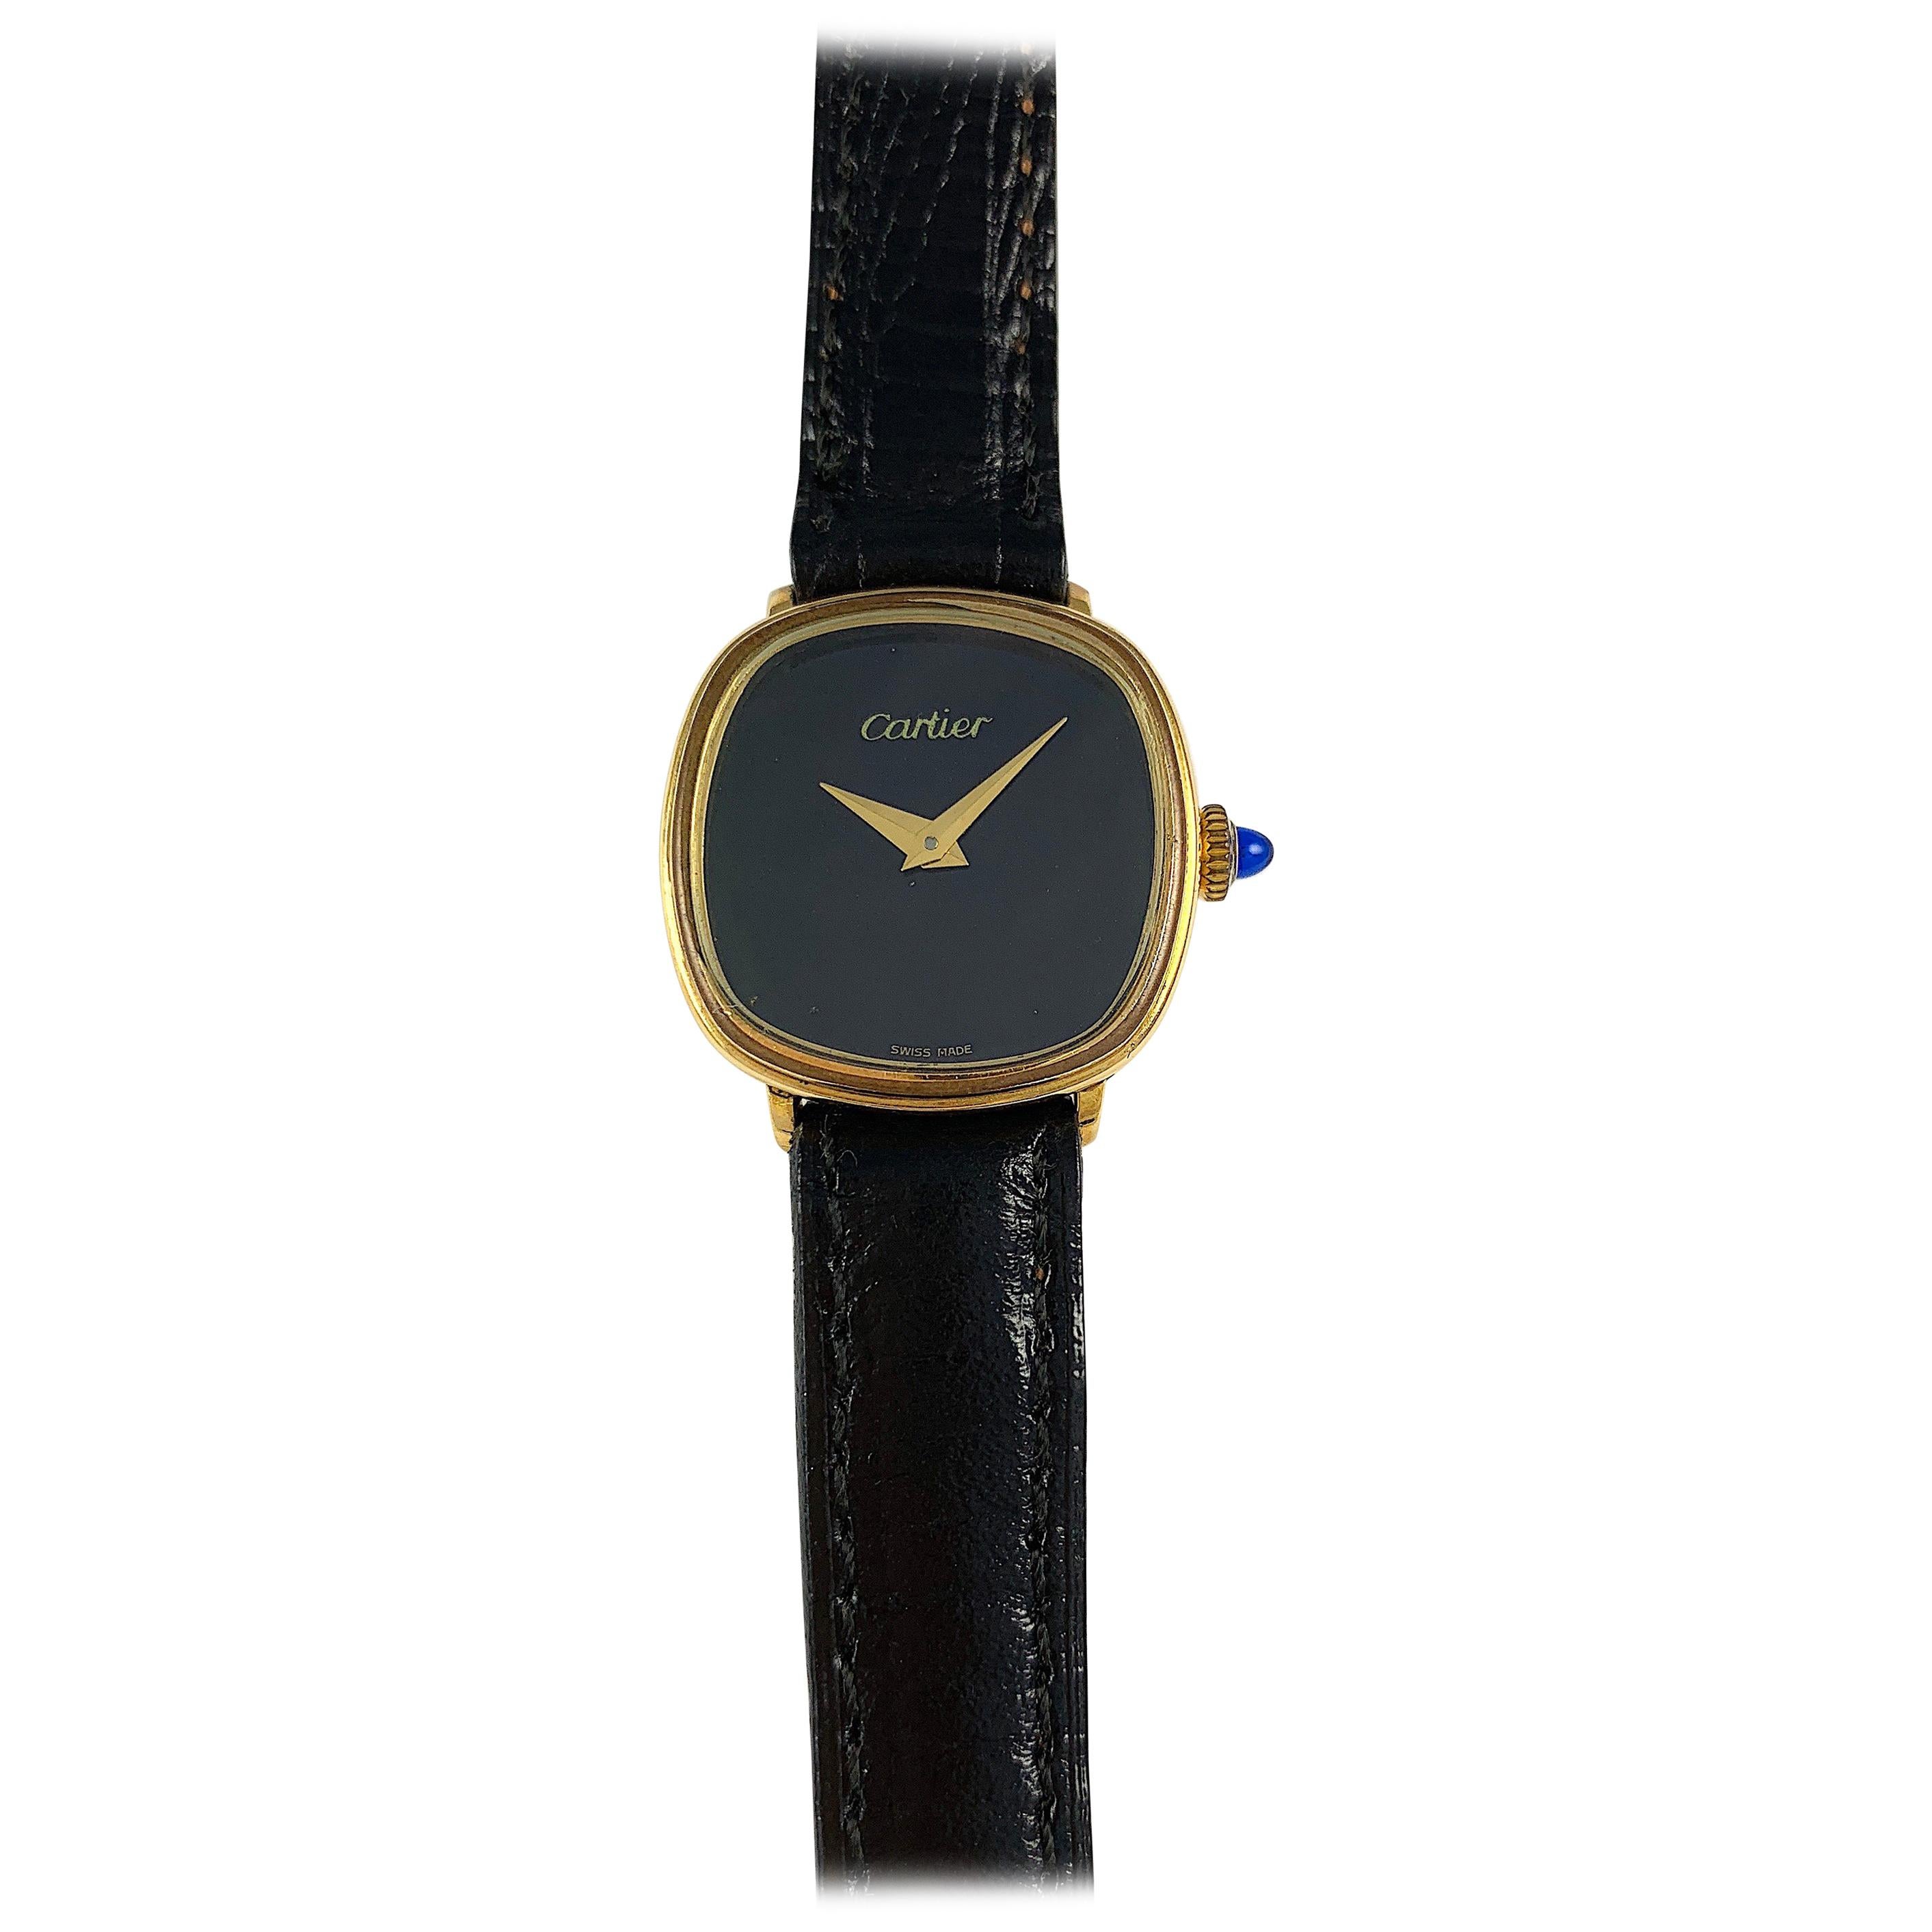 Cartier Vintage Black Onyx Dial Manual Wind Watch For Sale